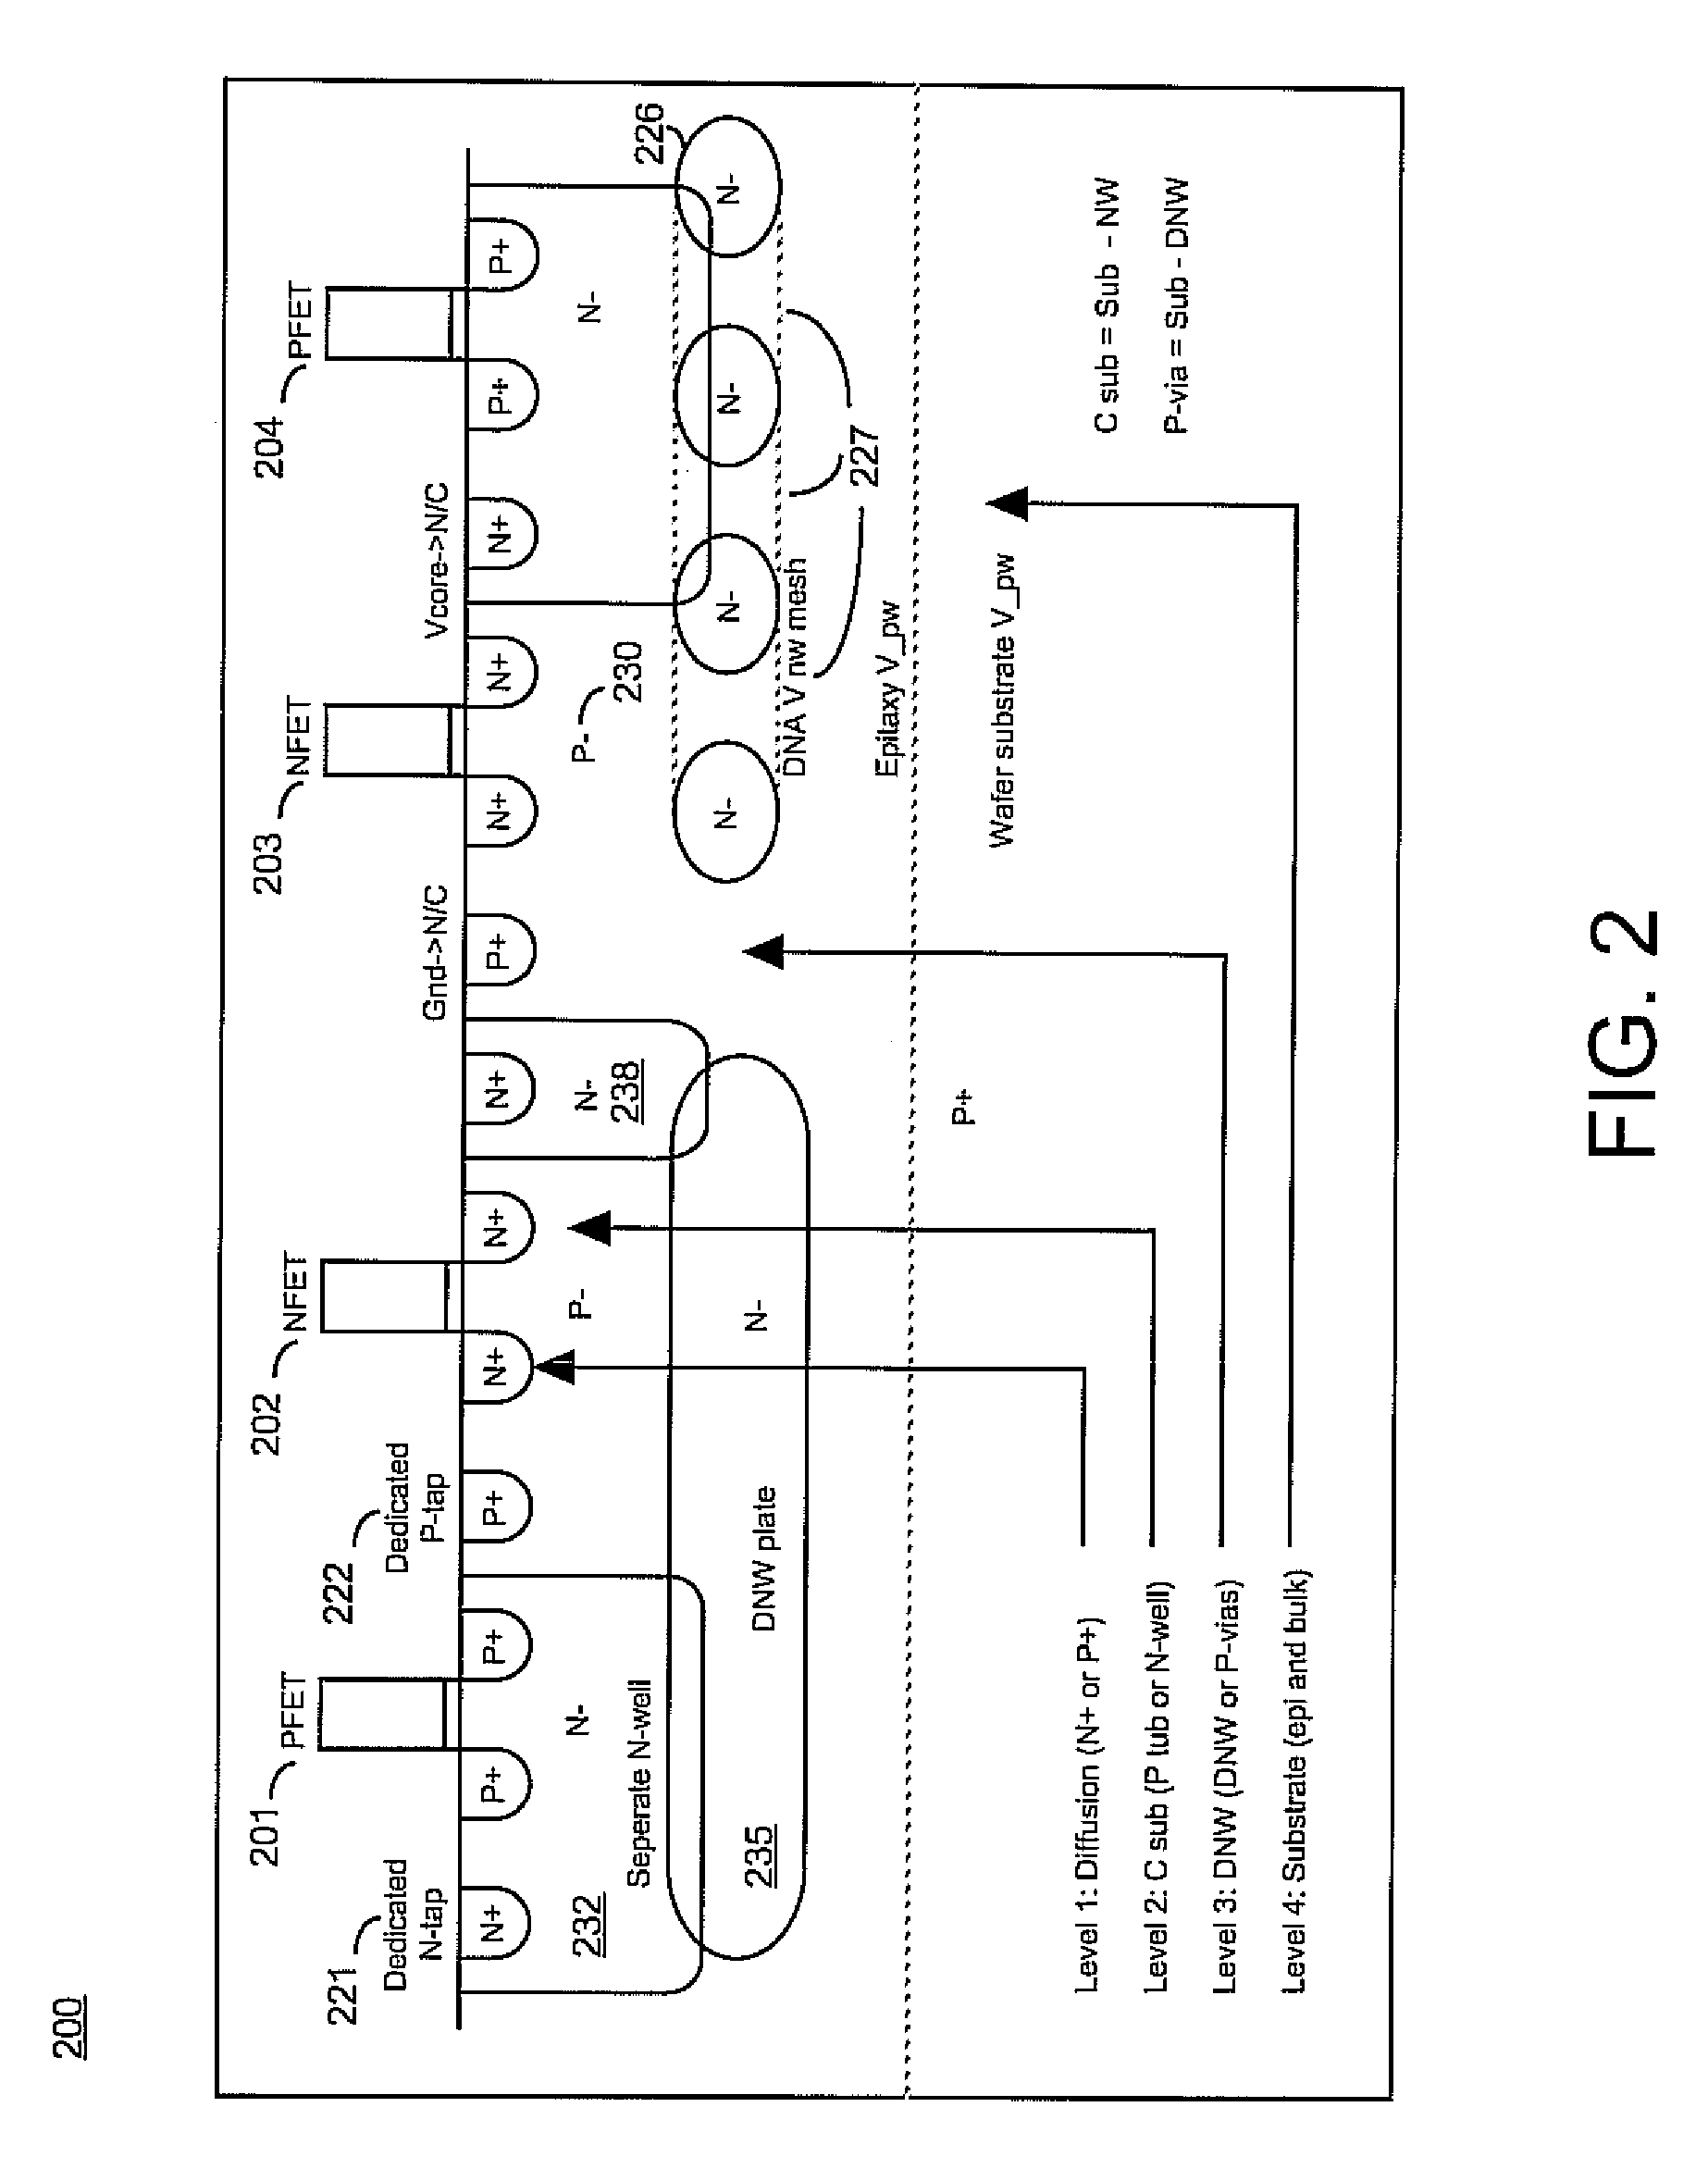 Method and system for automated schematic diagram conversion to support semiconductor body bias designs